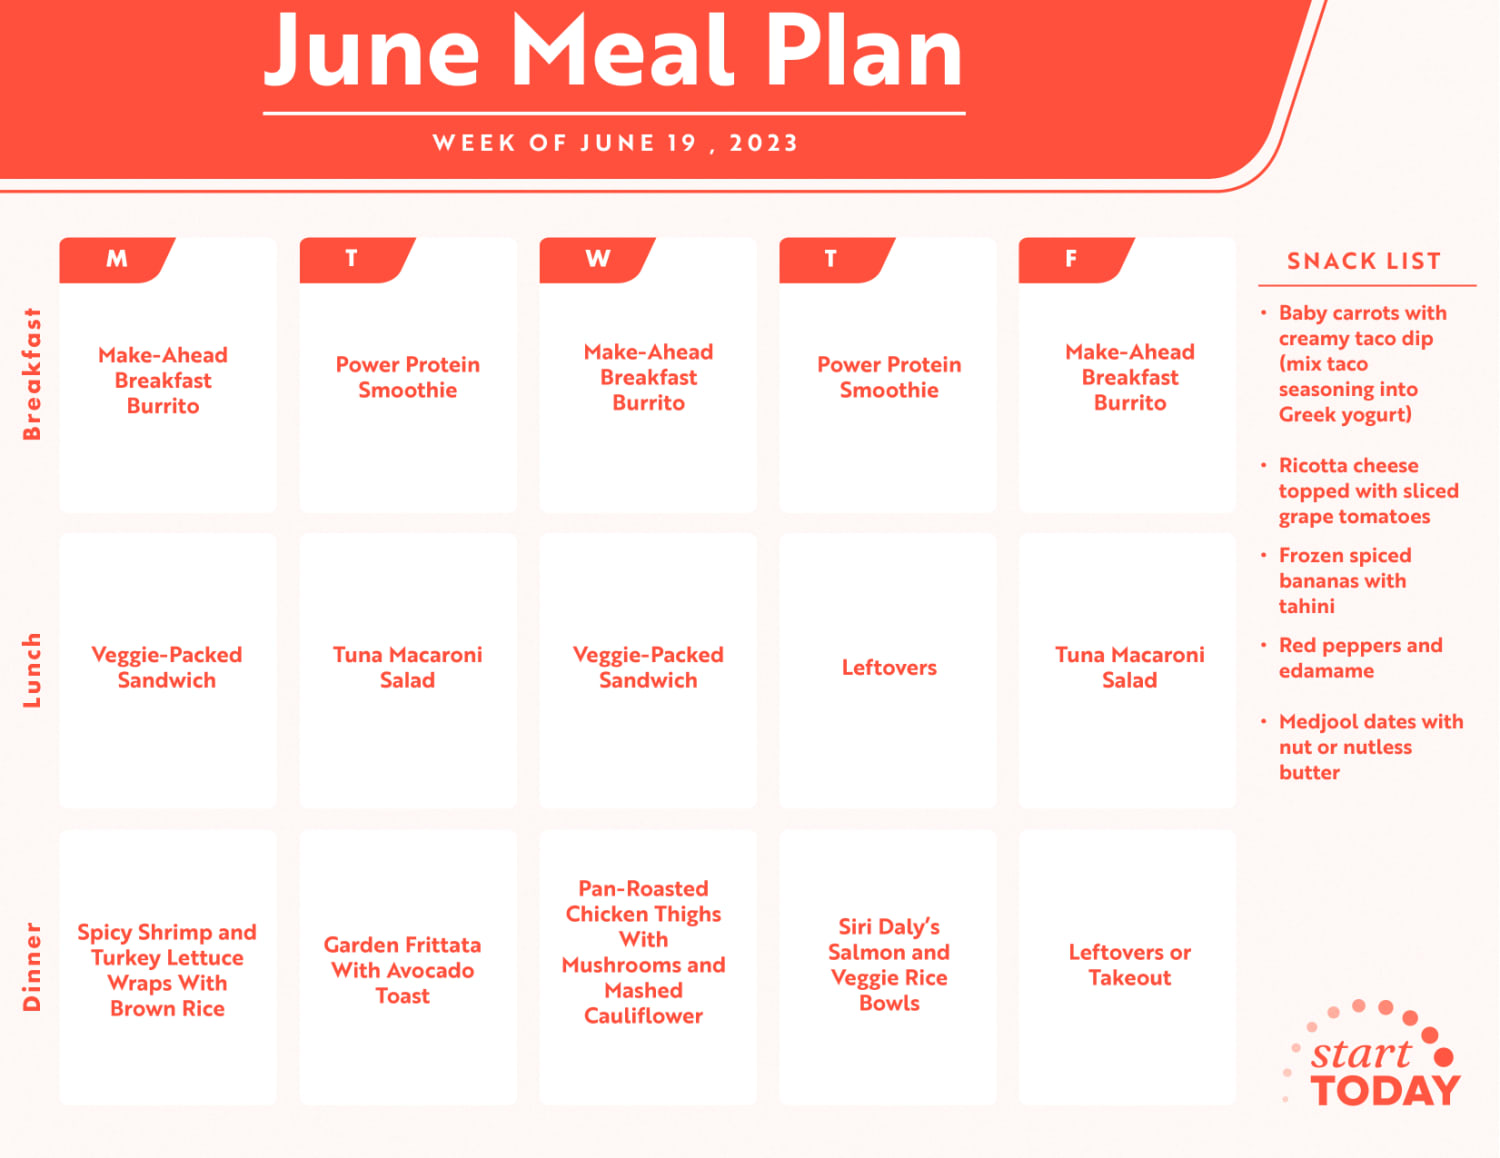 What to Eat This Week: Healthy Meal Plan for January 30, 2023